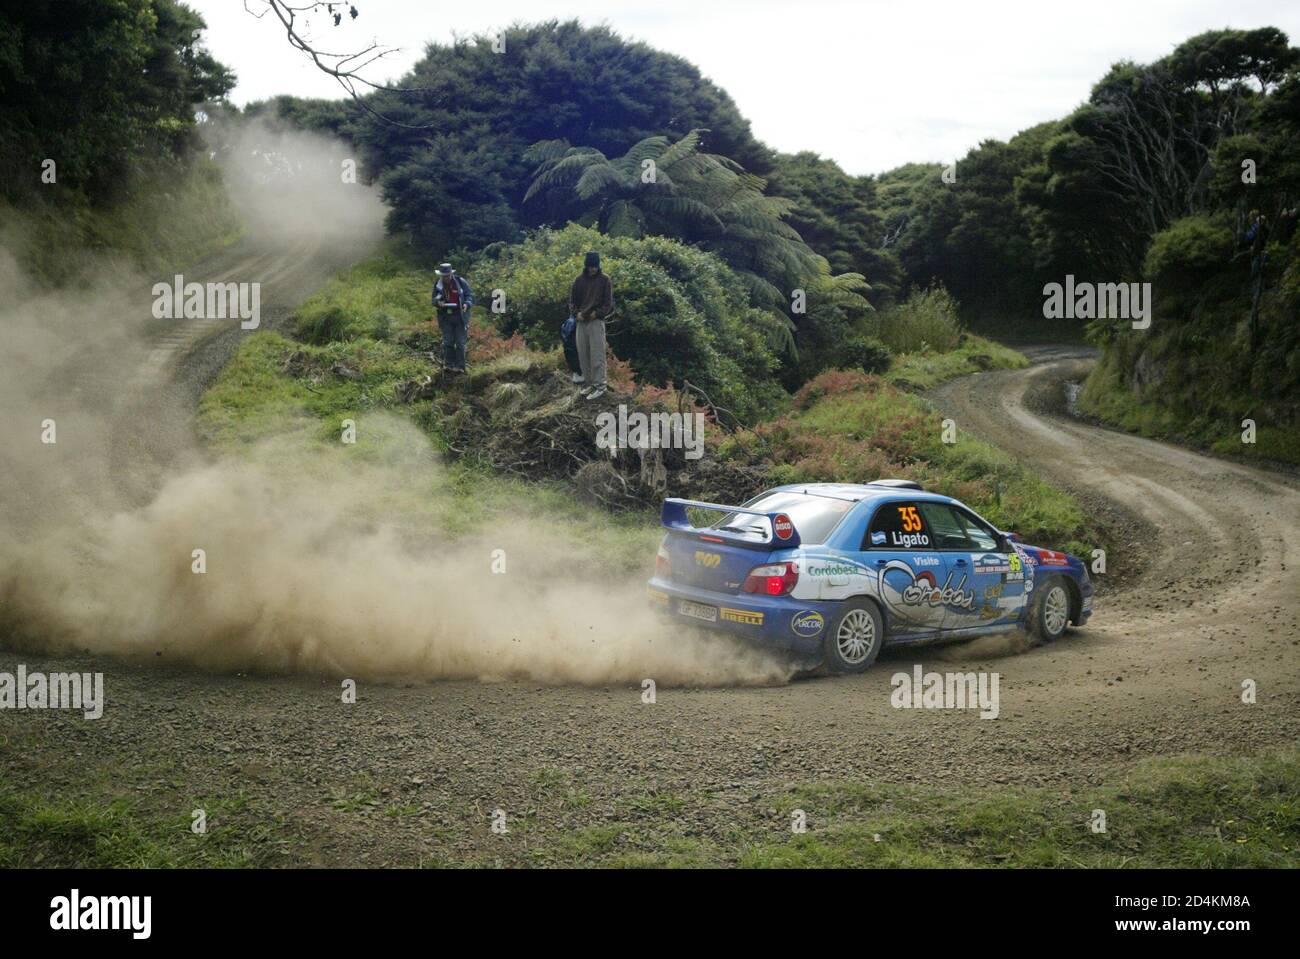 Marcos Ligato of Italy drives special stage 21 in his Subaru on the final day of the Propecia International Rally of New Zealand in Raglan, south of Auckland April 18, 2004. Norway's Petter Solberg won the rally by 5.9 seconds ahead of Gronholm. REUTERS/Nigel Marple  NM/SH Stock Photo